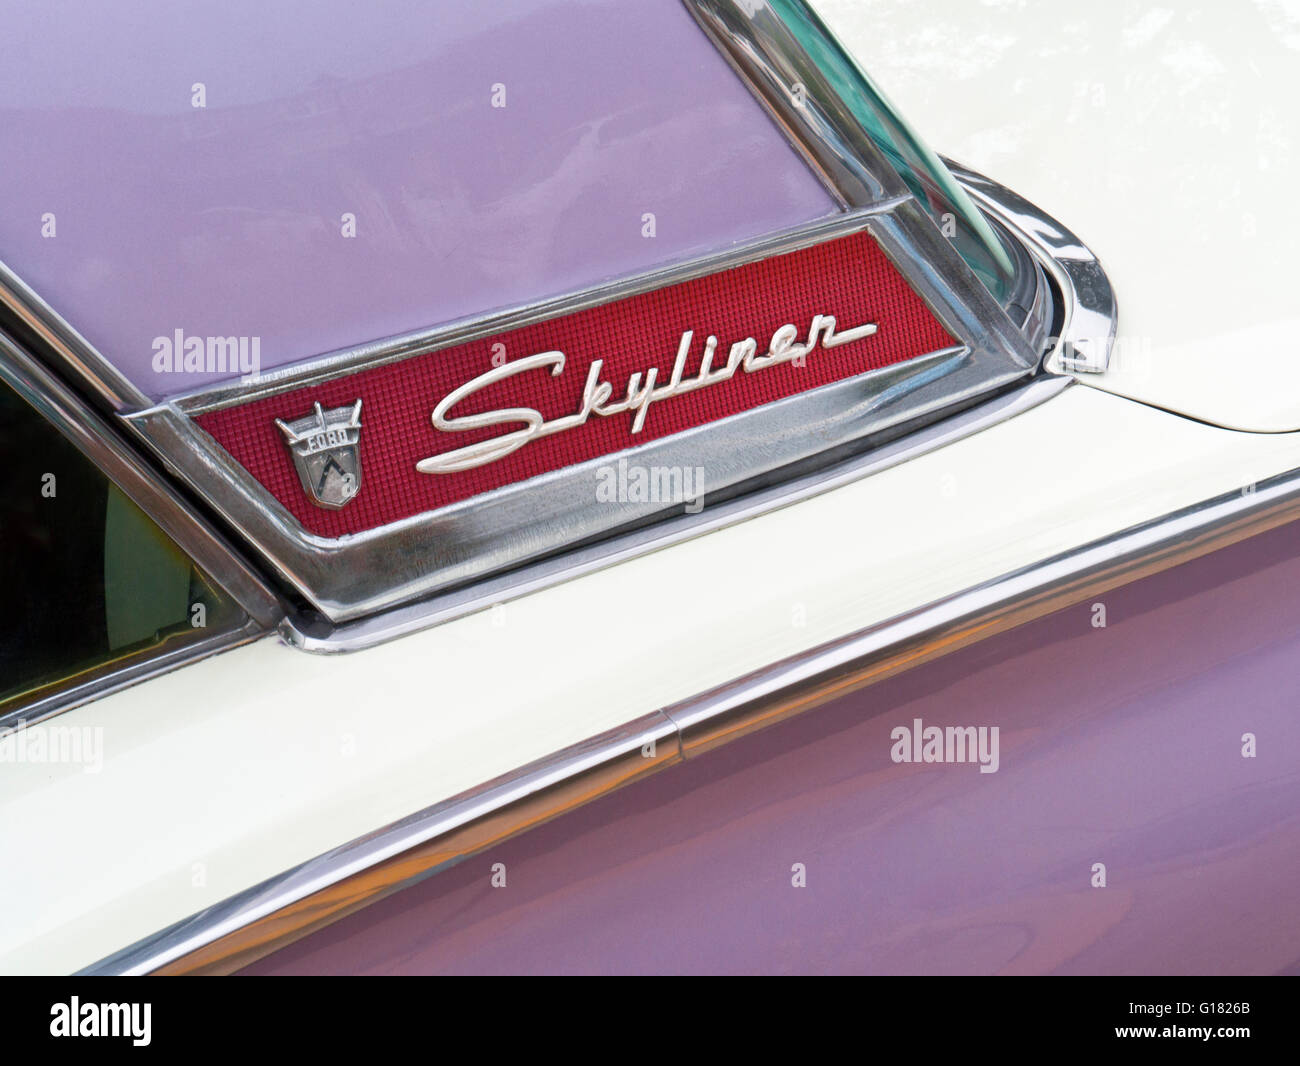 Detail name plaque on 1950's glossy restored Ford Fairlane Skyliner American classic motor car Stock Photo